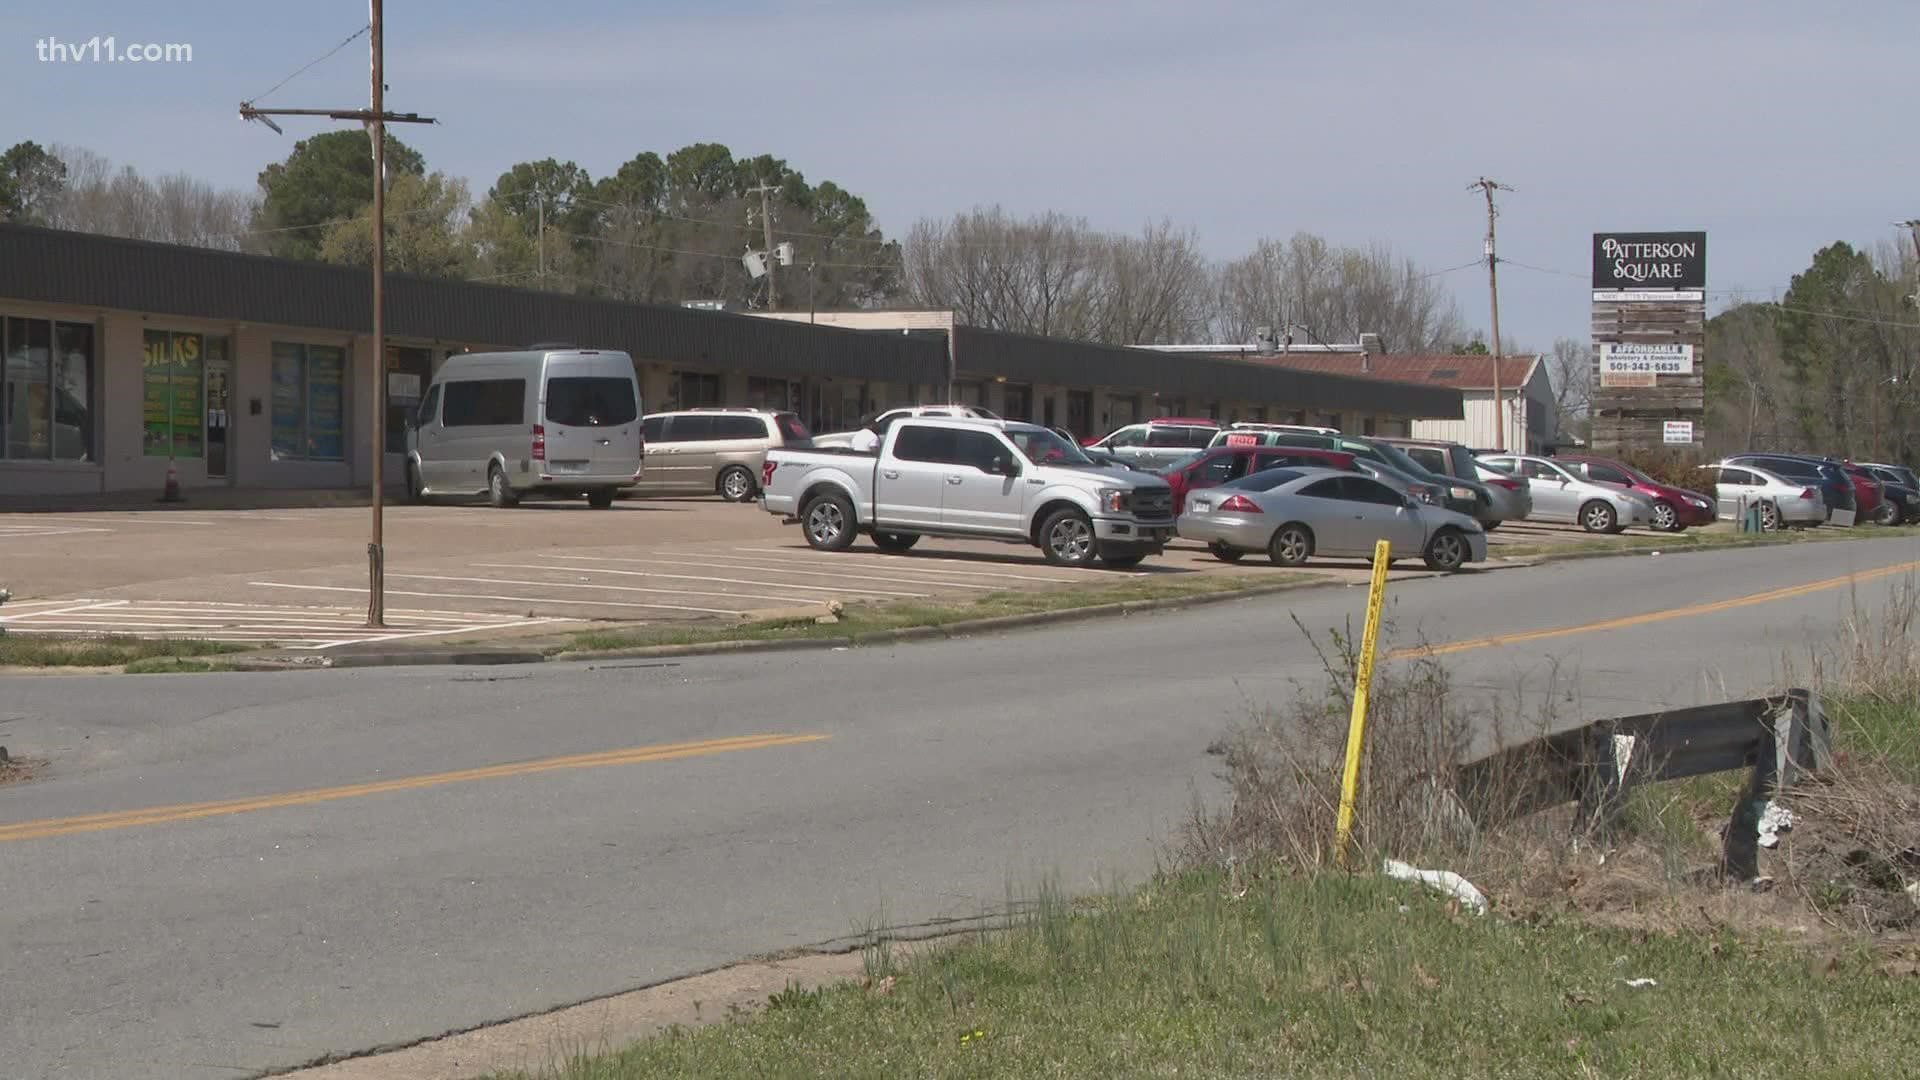 Little Rock police are investigating homicides happened at Patterson Road and in the River Market.